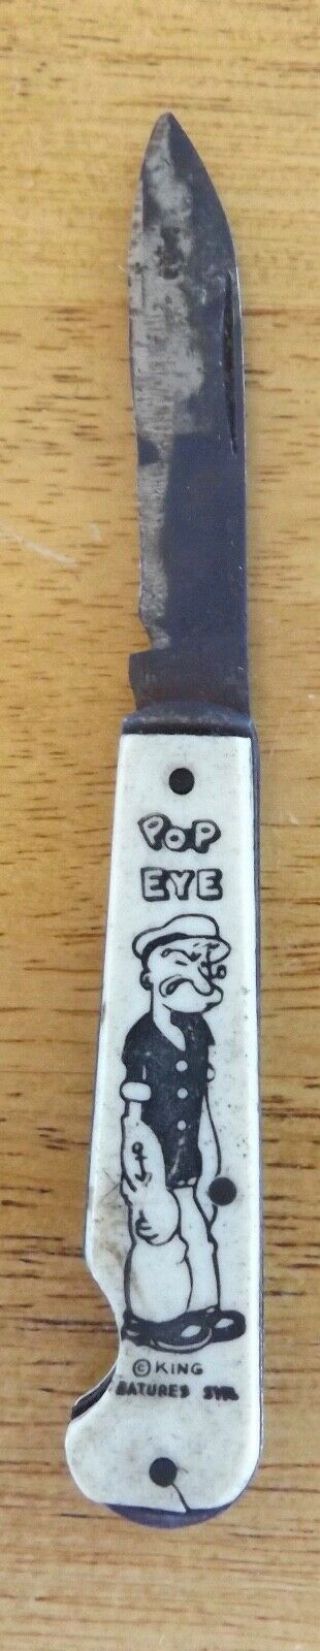 Vintage Popeye The Sailor Novelty Pocket Knife With Clear Image